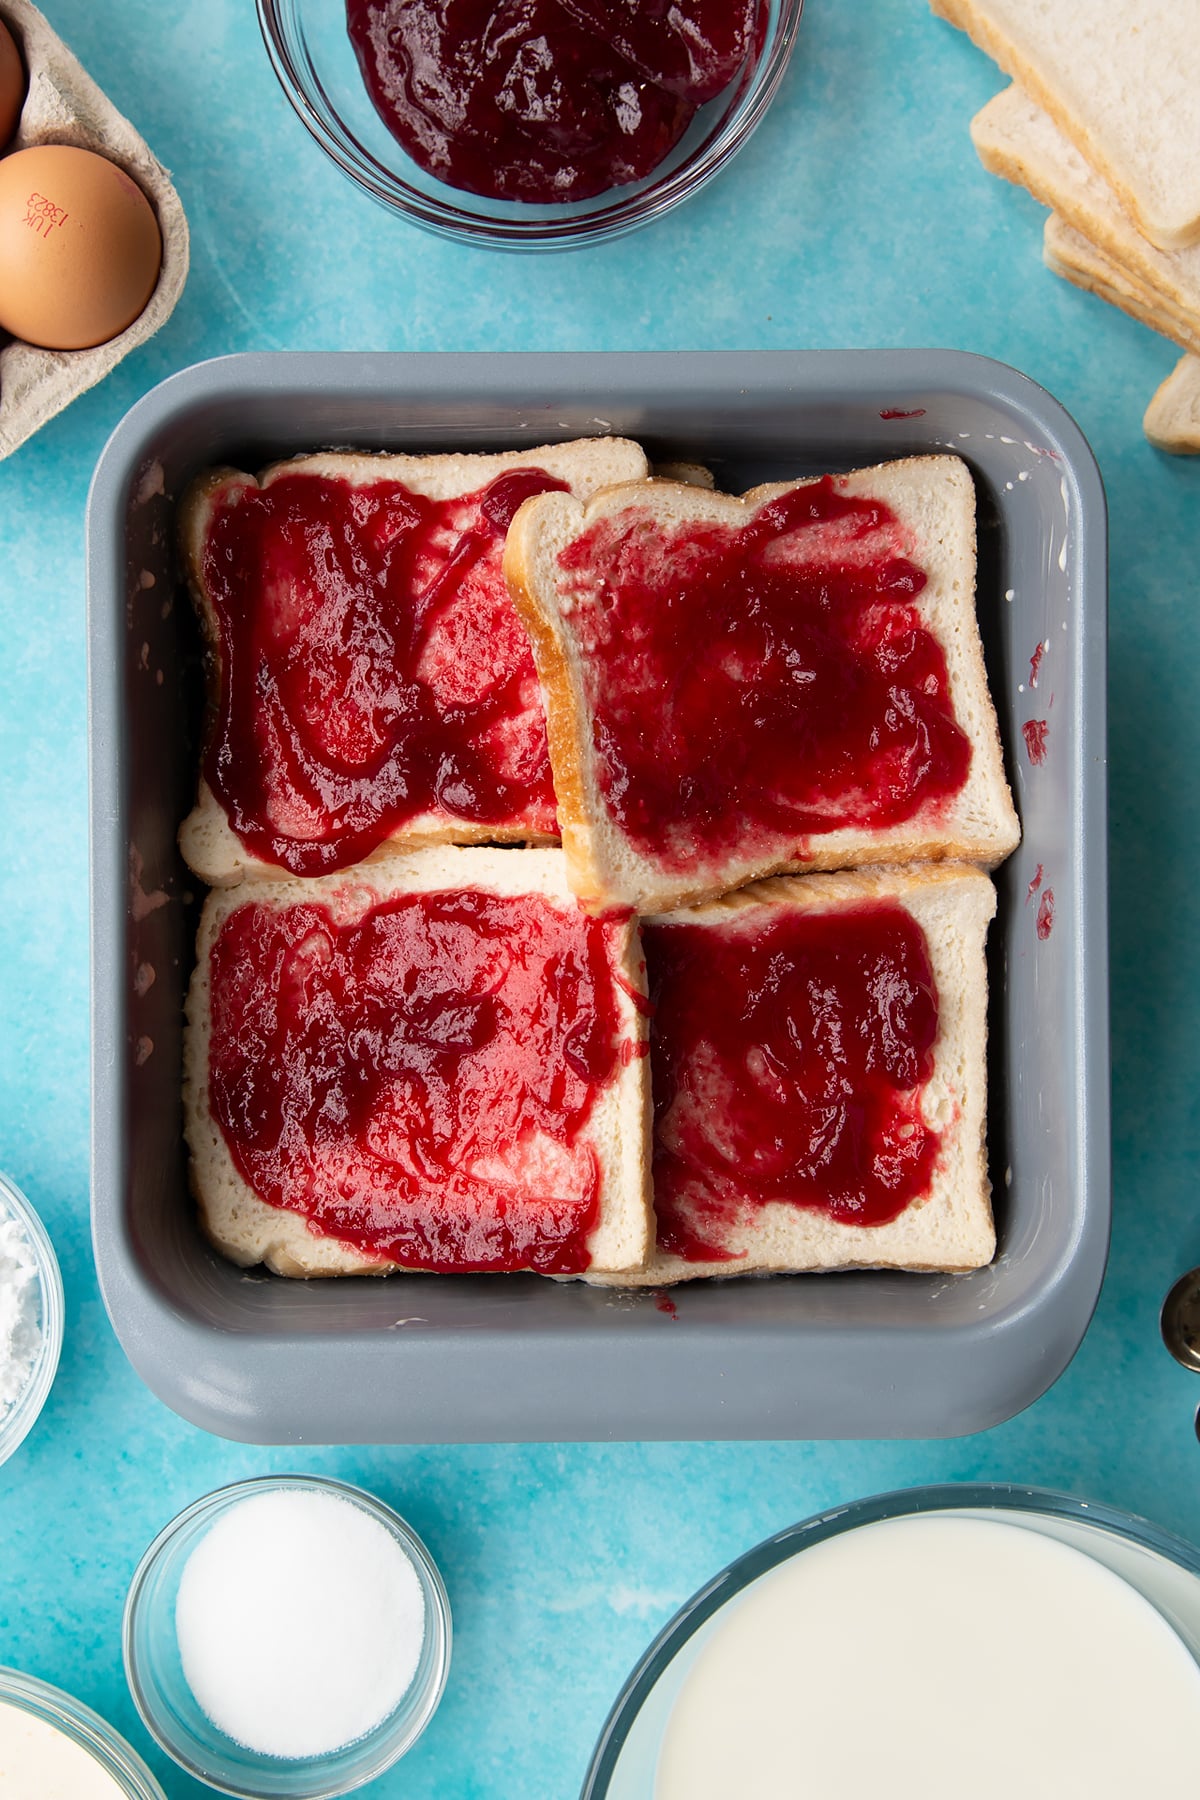 Spreading the remaining jam on the bread inside the baking tin.